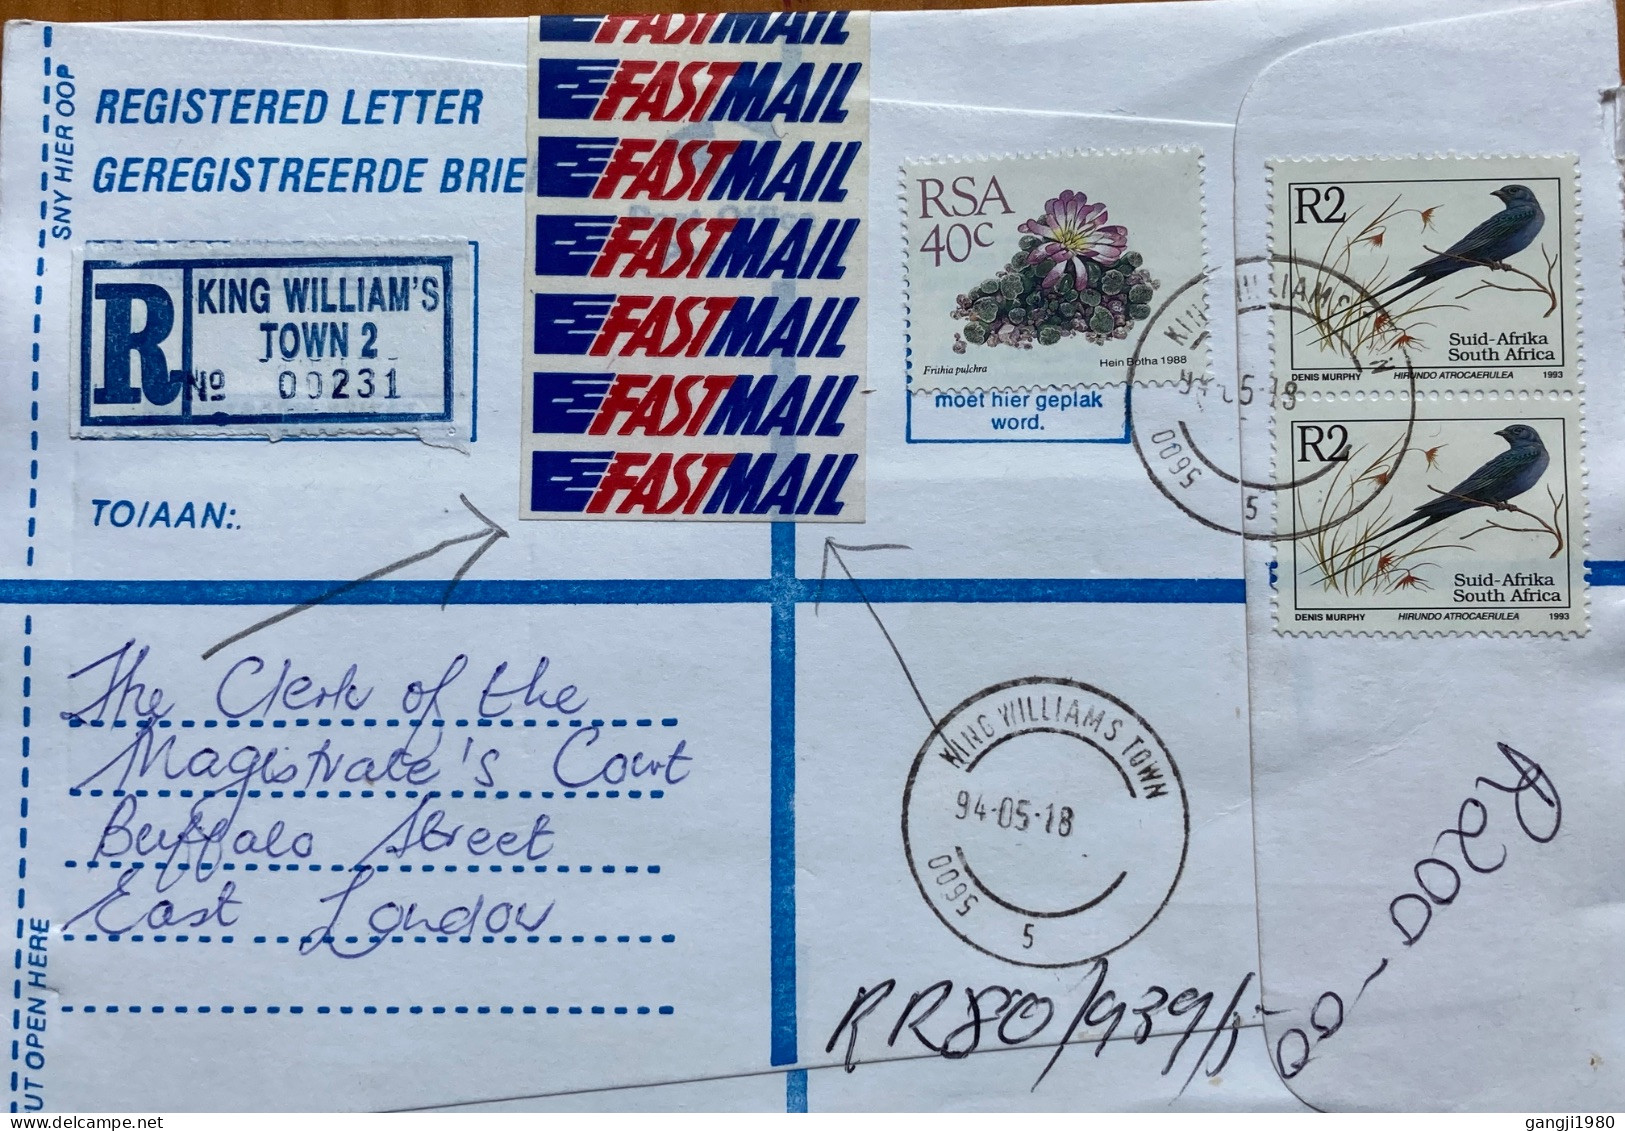 SOUTH AFRICA-1994, REGISTER STATIONERY, COVER USED, 3 SIDE OPEN, VIGNETTE FASTMAIL LABEL, BIRD & FLOWER, KING WILLIAM'S - Cartas & Documentos